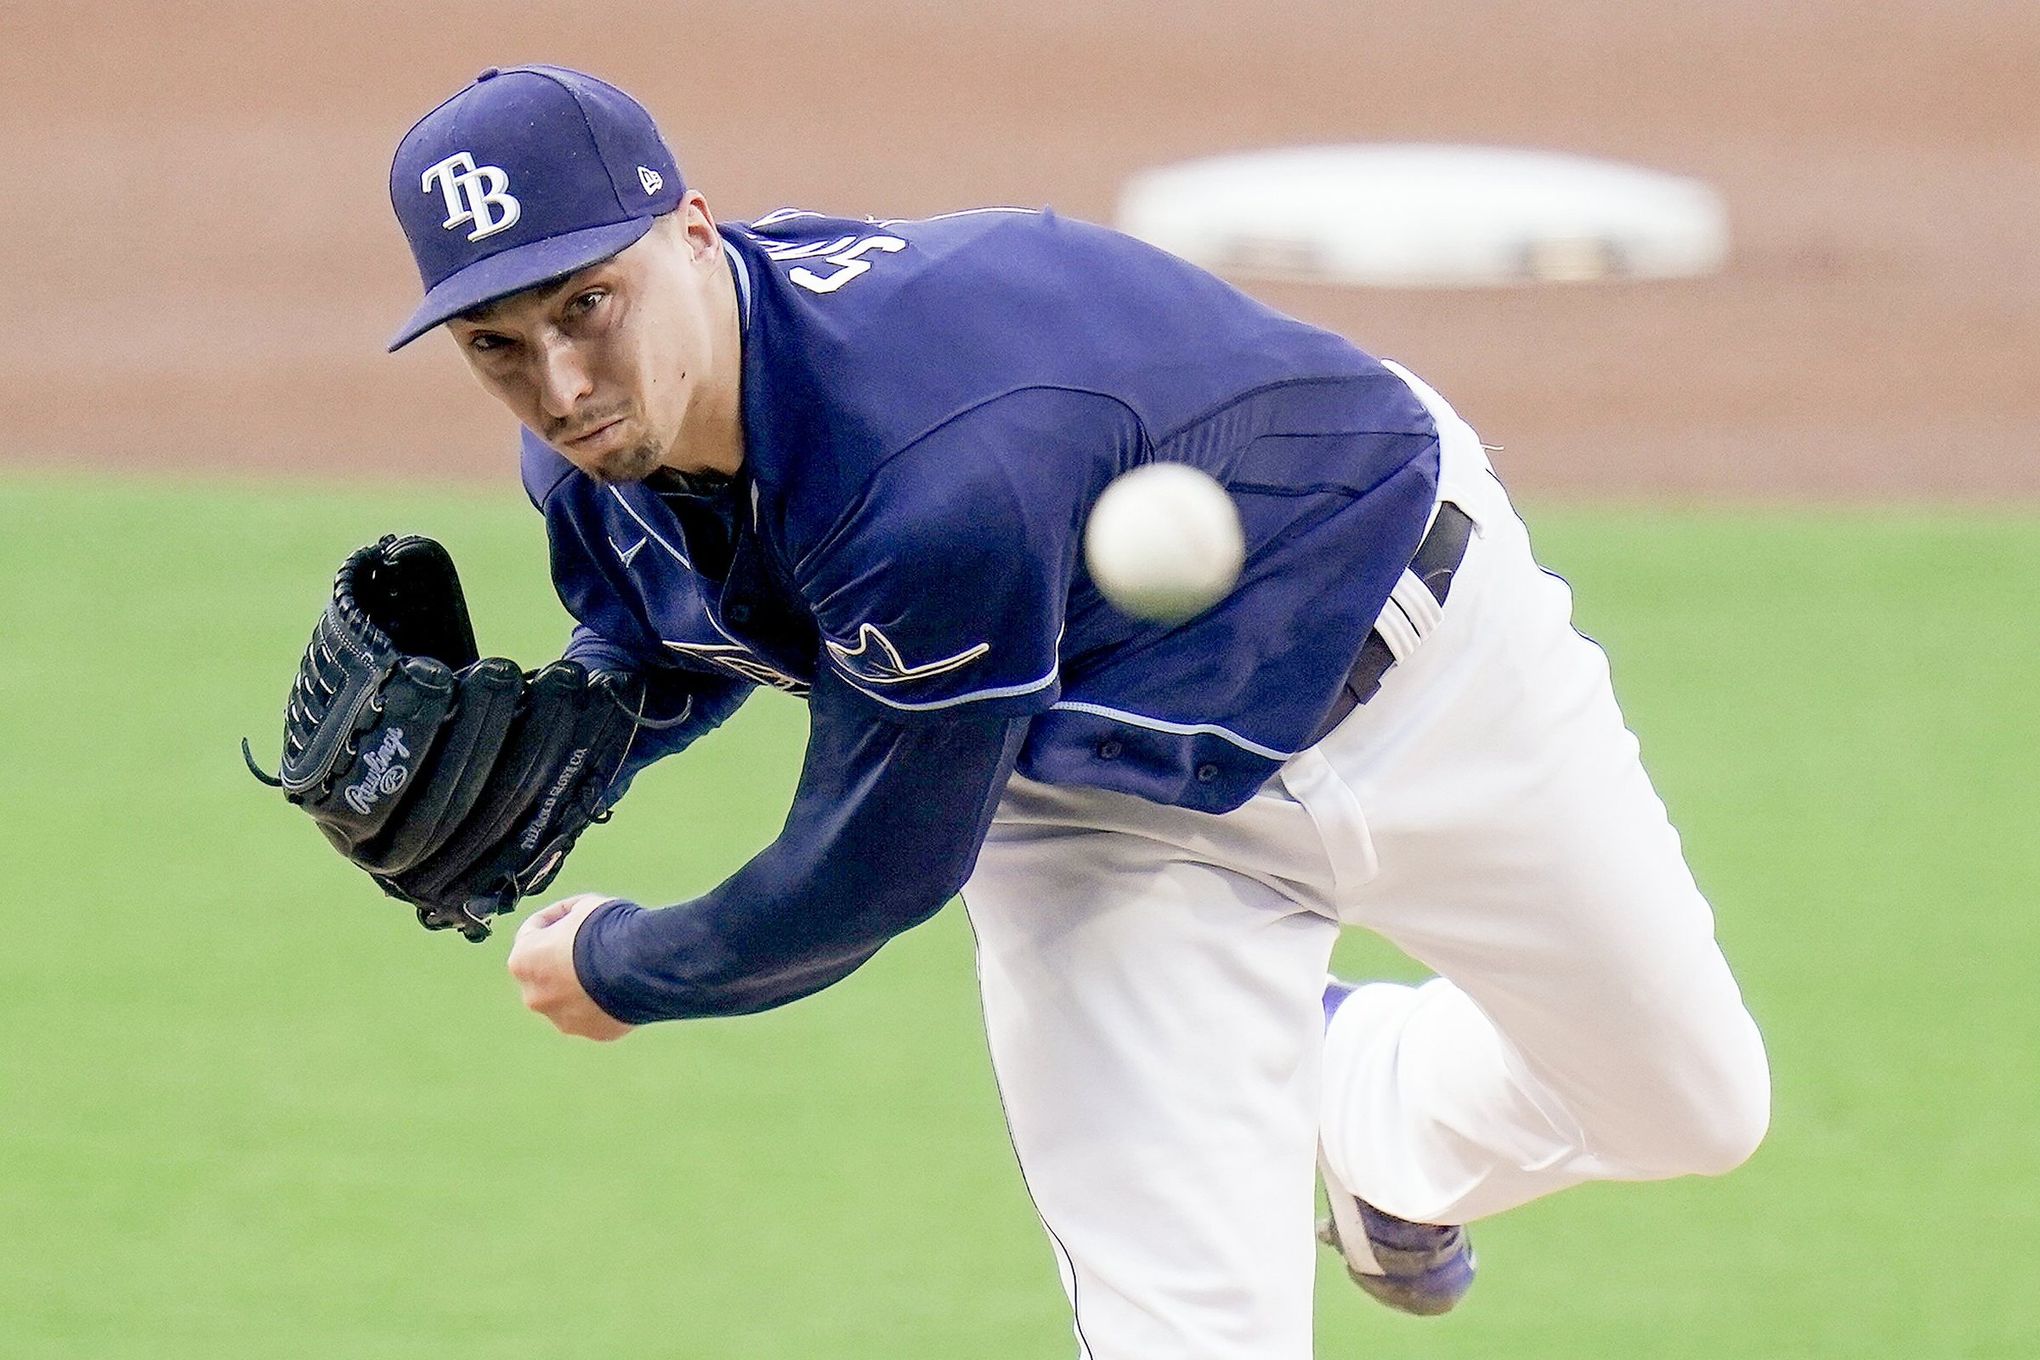 Why pitching is now 'personal' for Rays lefty Blake Snell